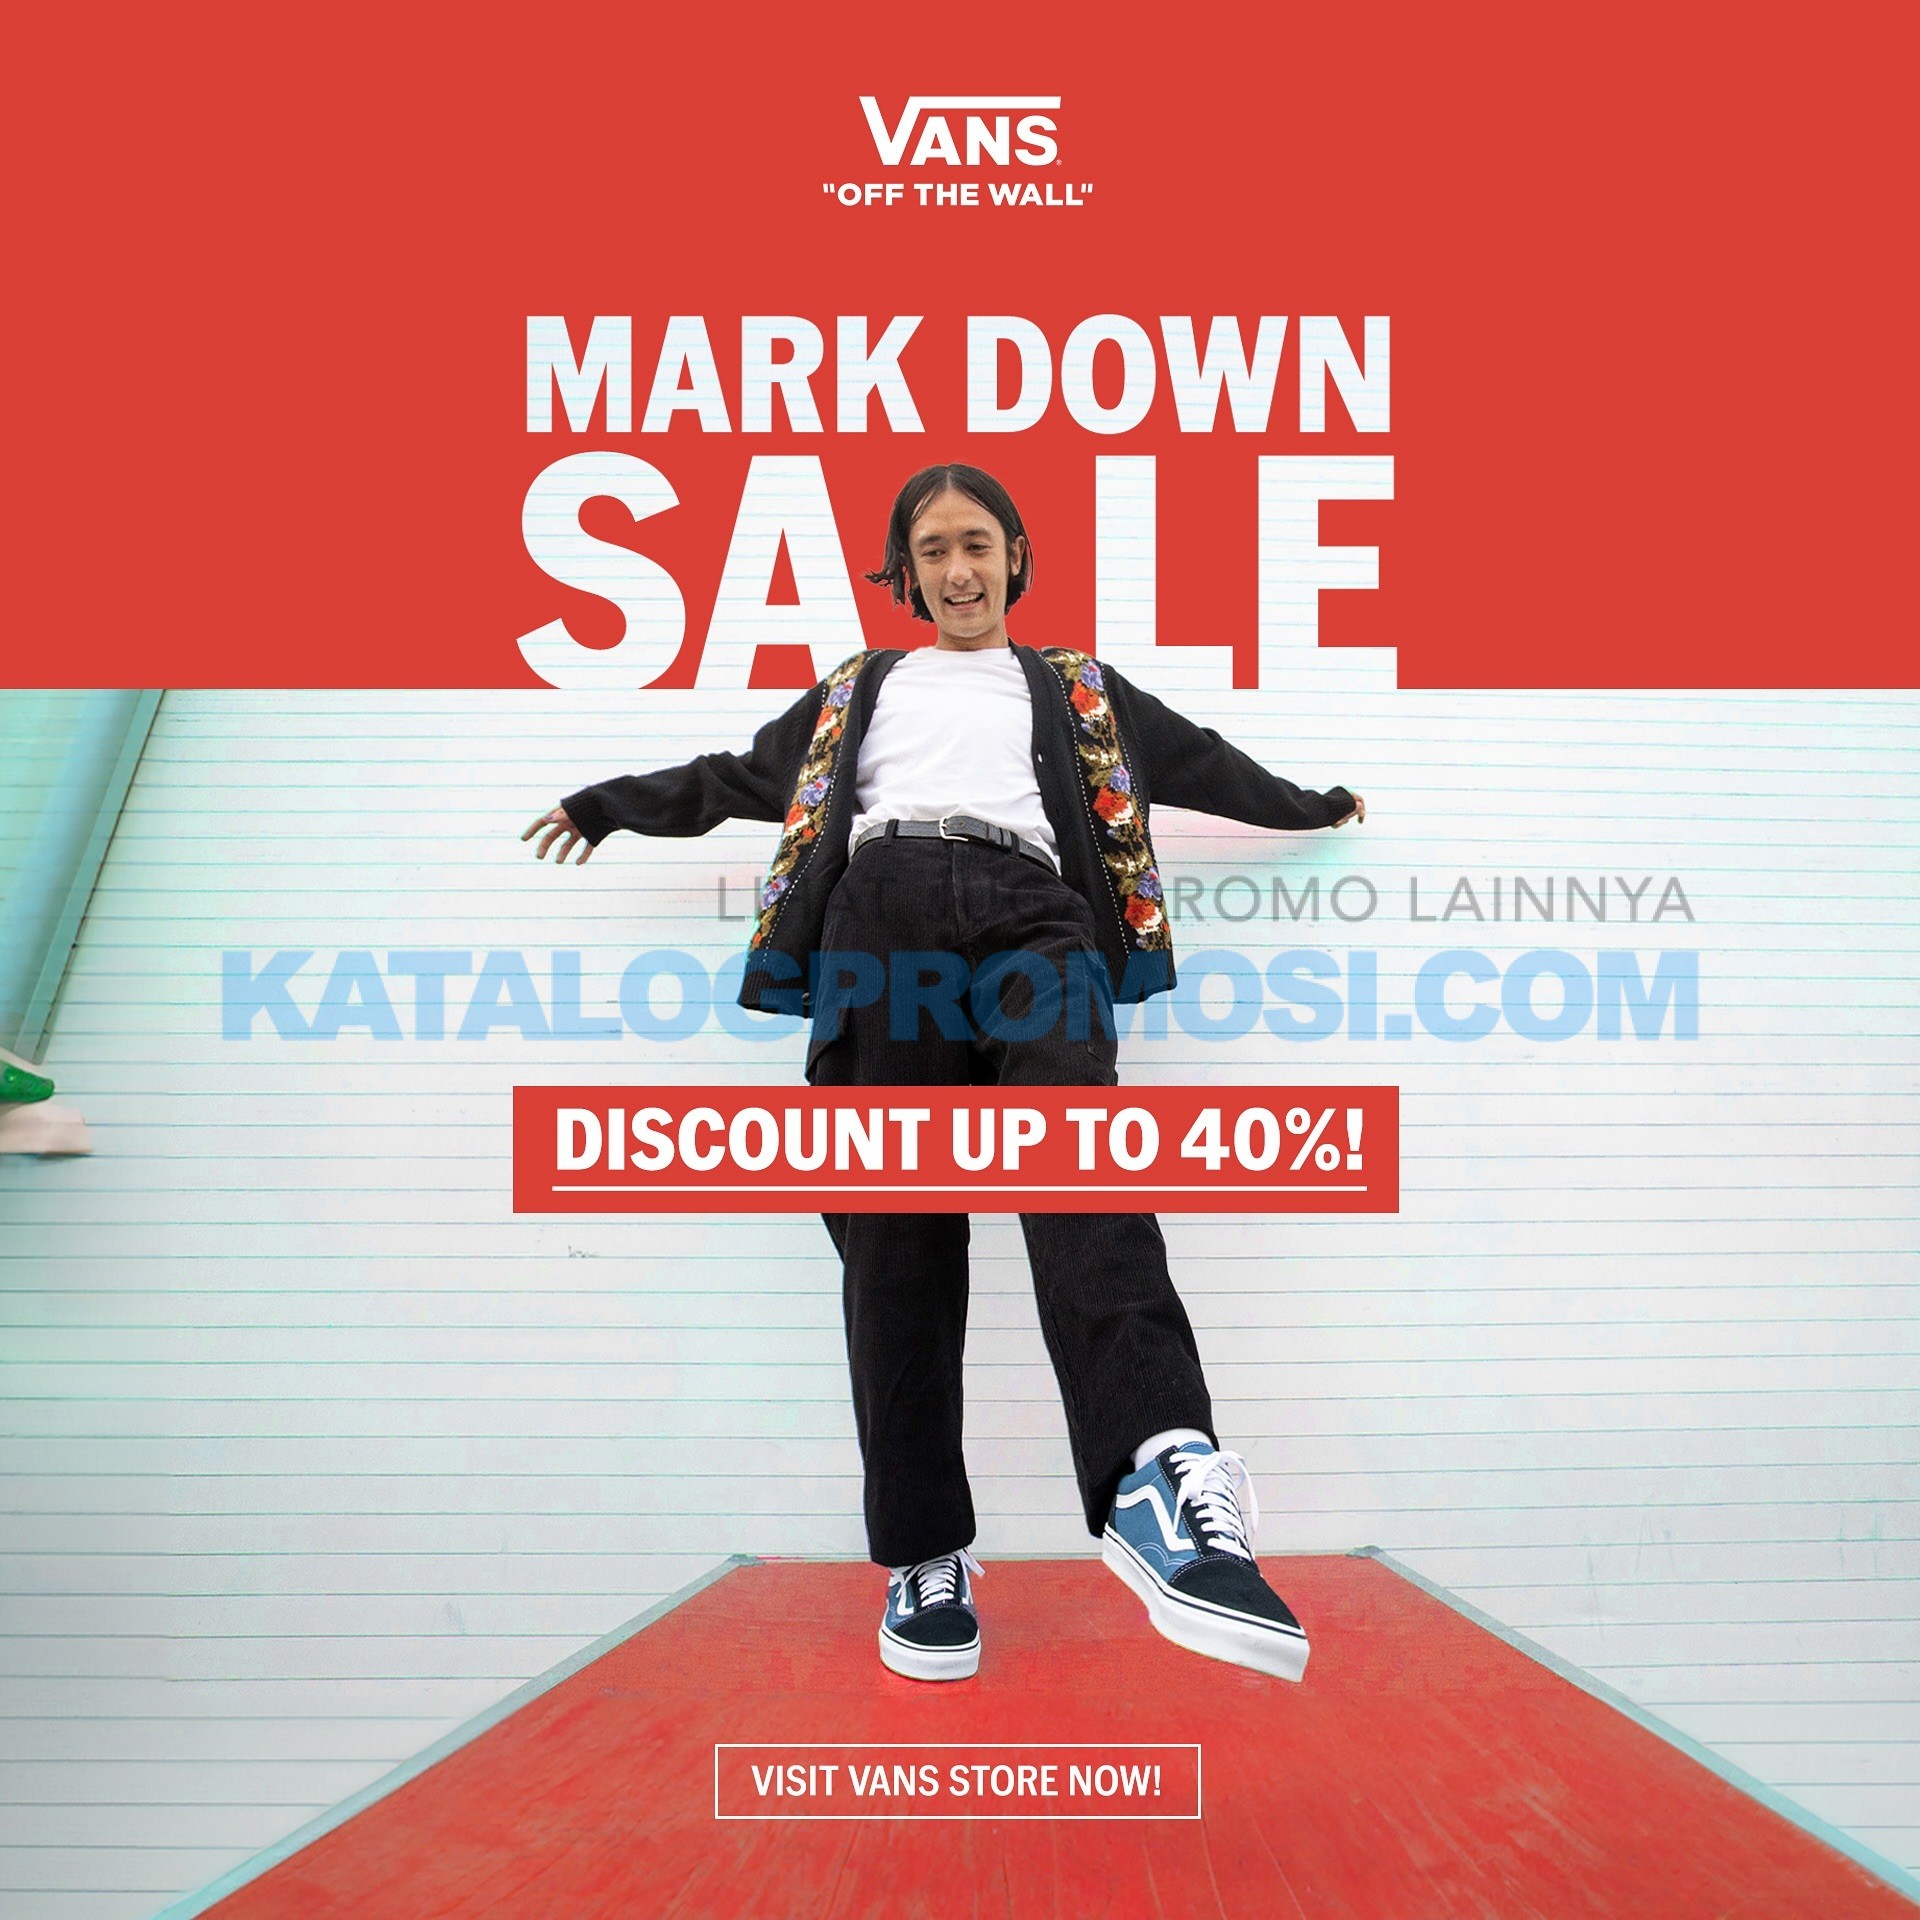 PROMO VANS MARKDOWN SALE!! DISCOUNT up to 40% off